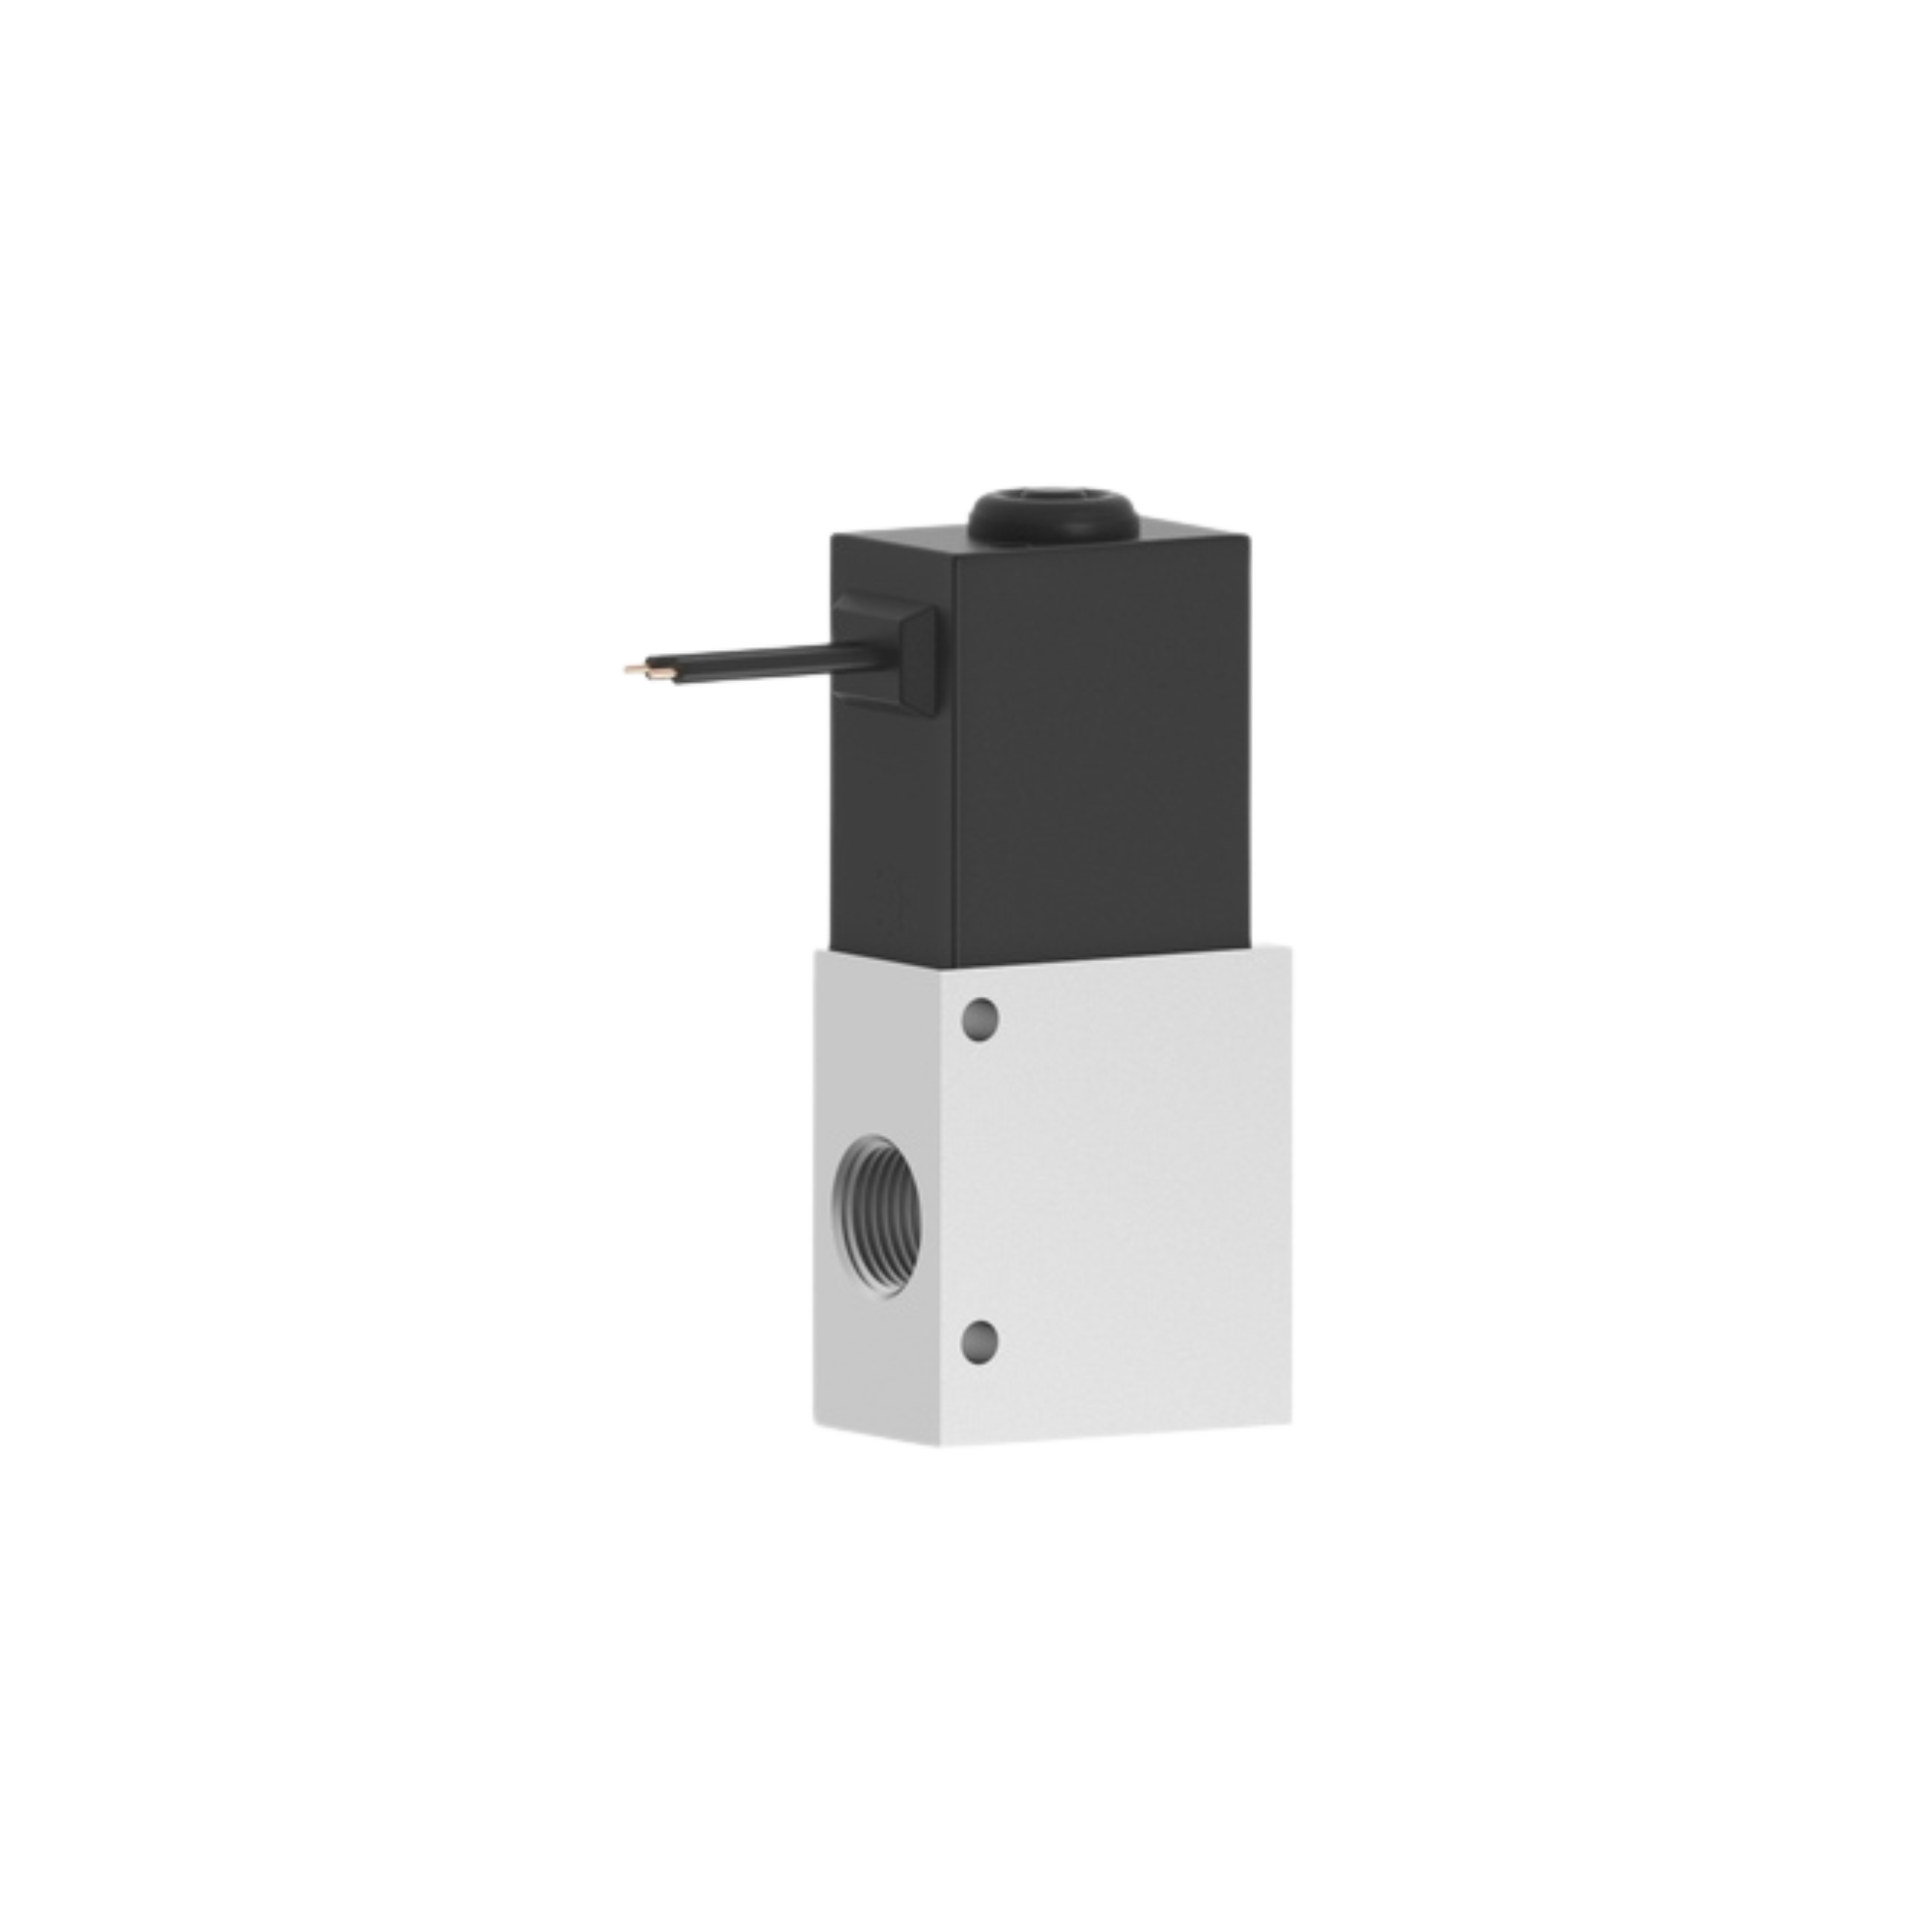 side view of an upright rectangular valve with a port on the bottom left side and electrical wires on the top left side